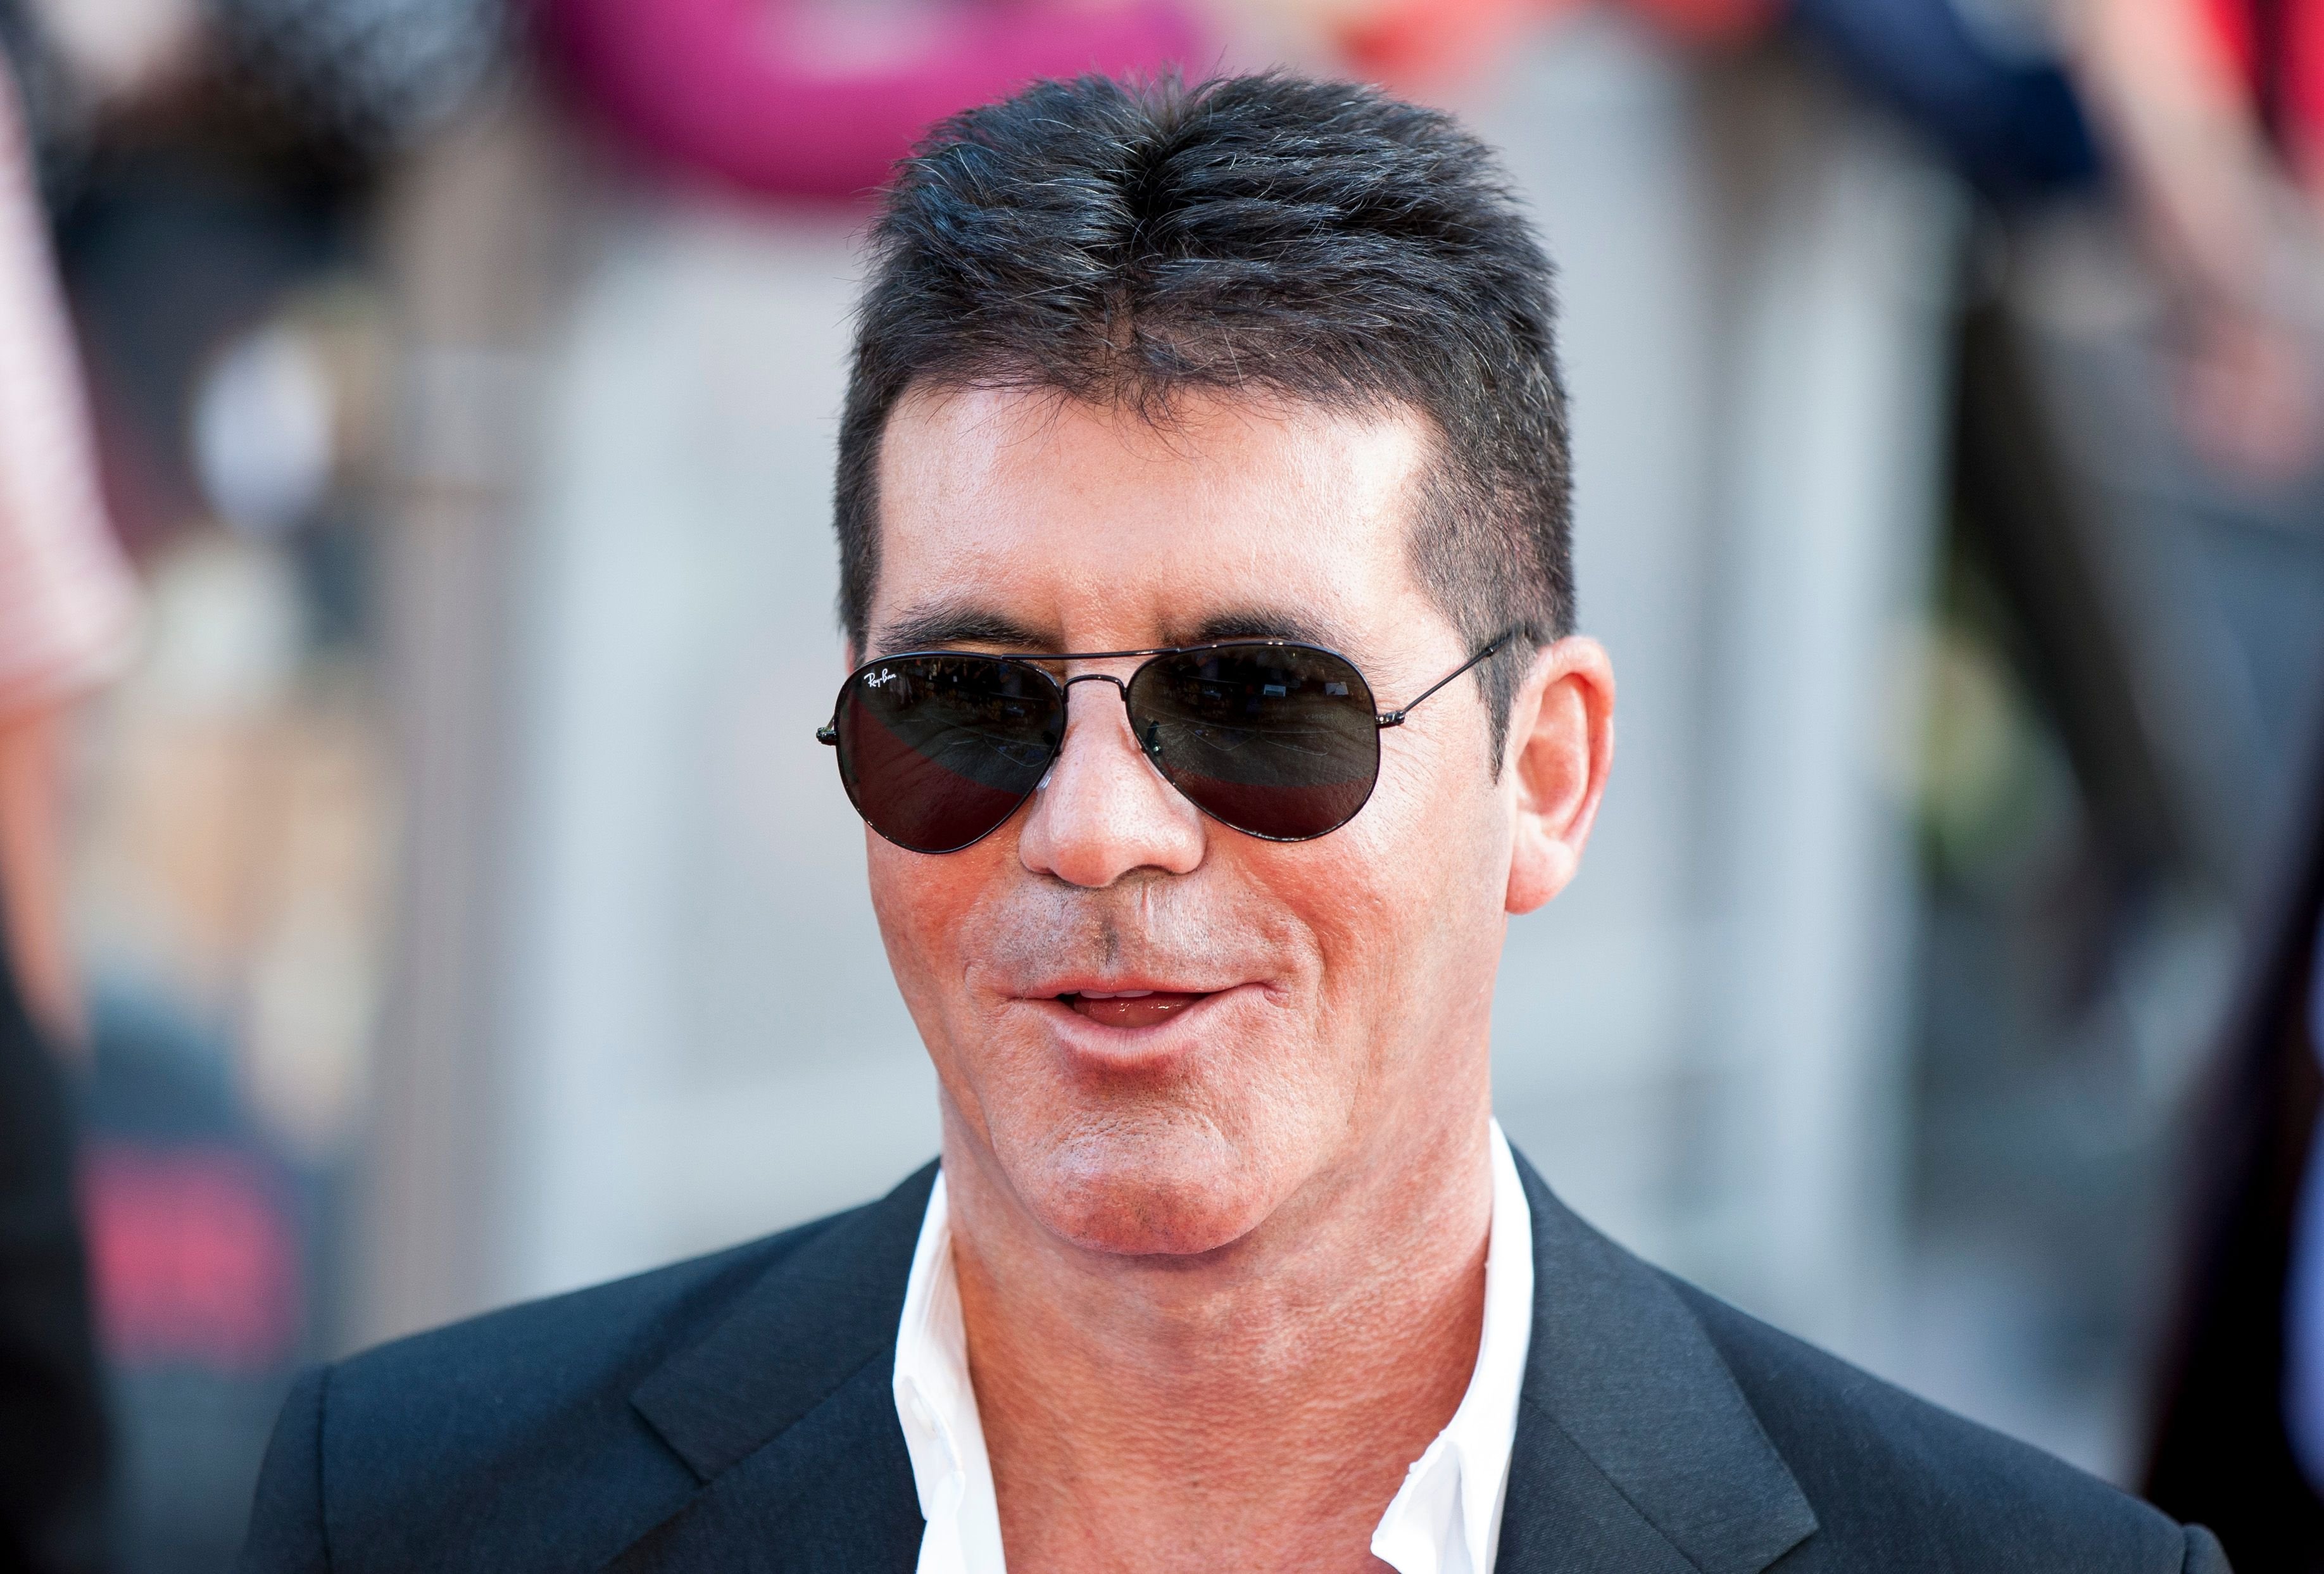 Simon Cowell during the World Premiere of 'One Direction: This Is Us' at Empire Leicester Square on August 20, 2013 in London, England. | Source: Getty Images